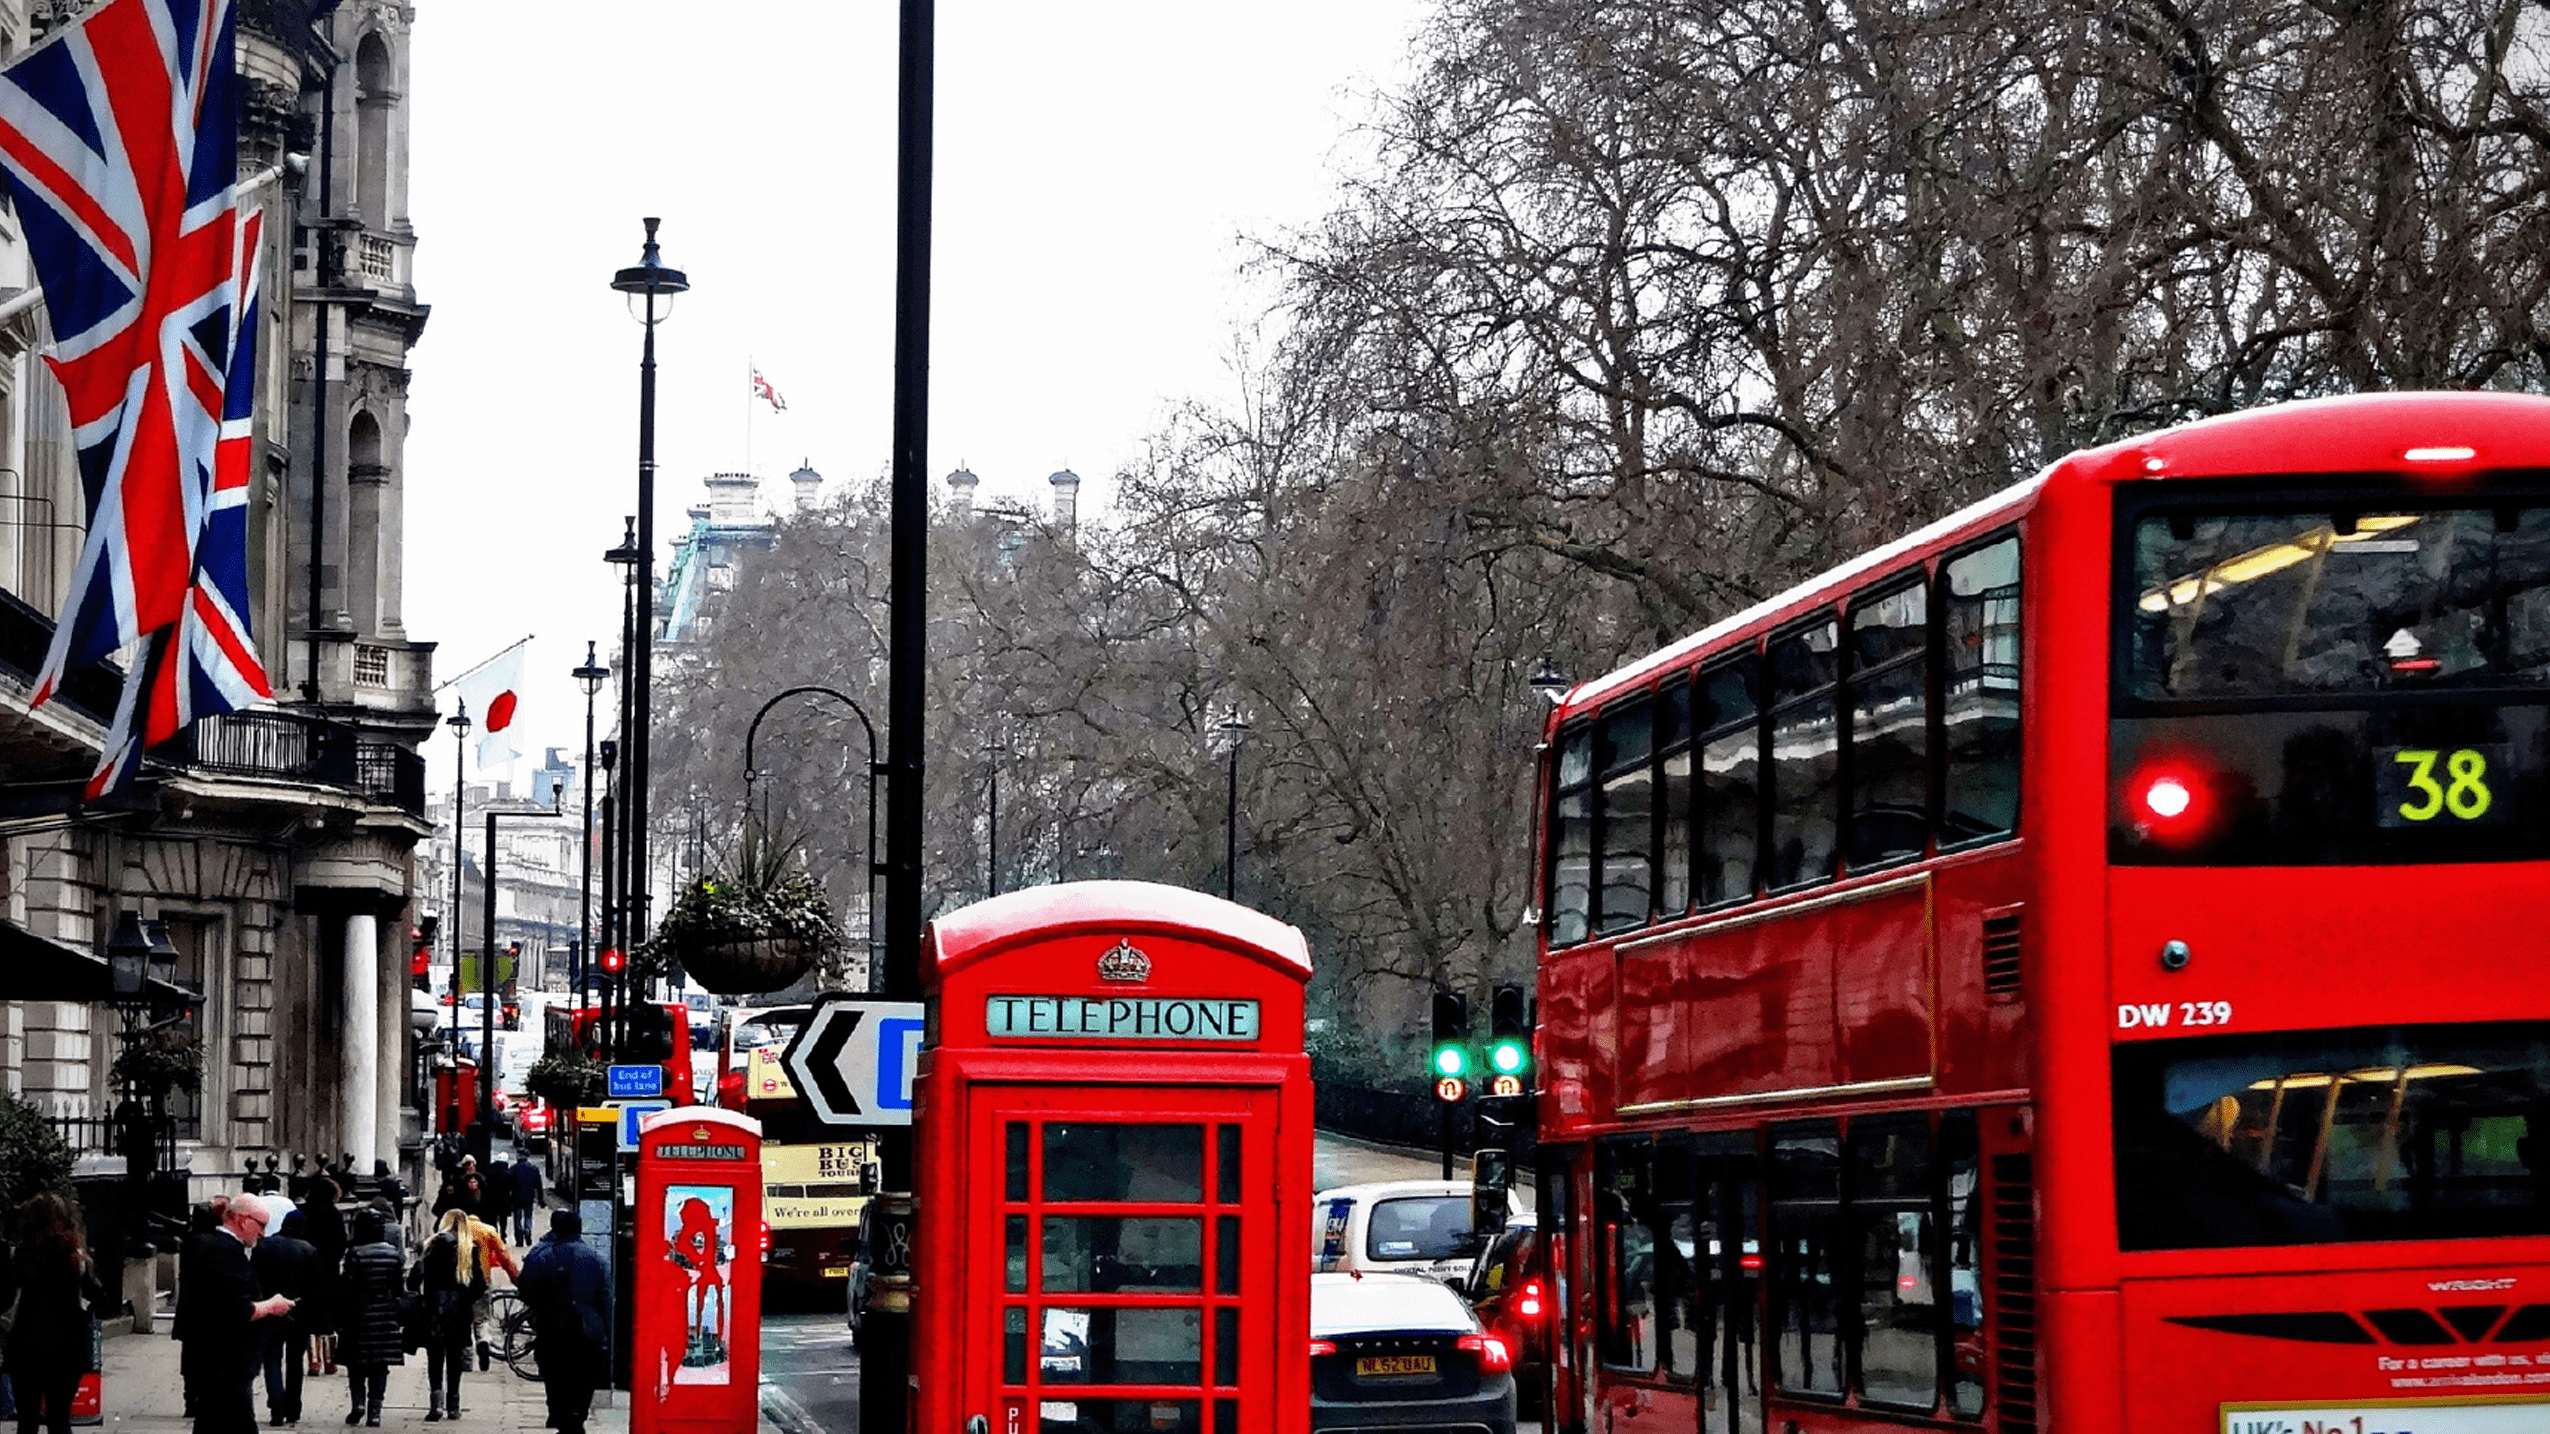 Image of London featuring the British Flag, a telephone booth, and a double decker truck.